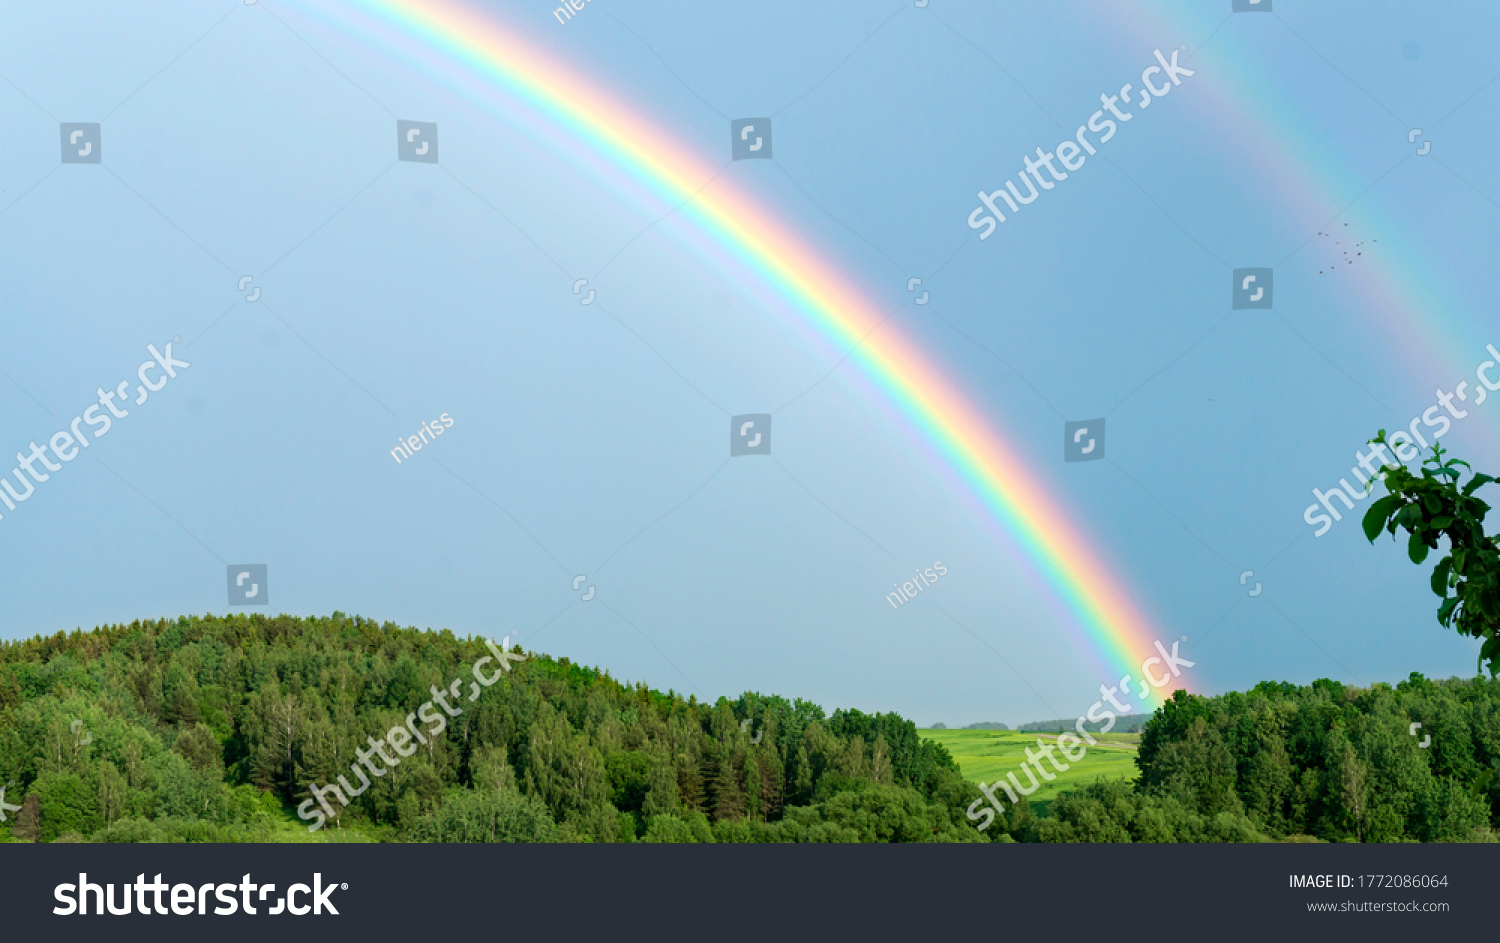 Double rainbow on a gray sky after rain. A rare atmospheric phenomenon after a storm. Beautiful hilly landscape with a real rainbow after rain on a summer day. #1772086064